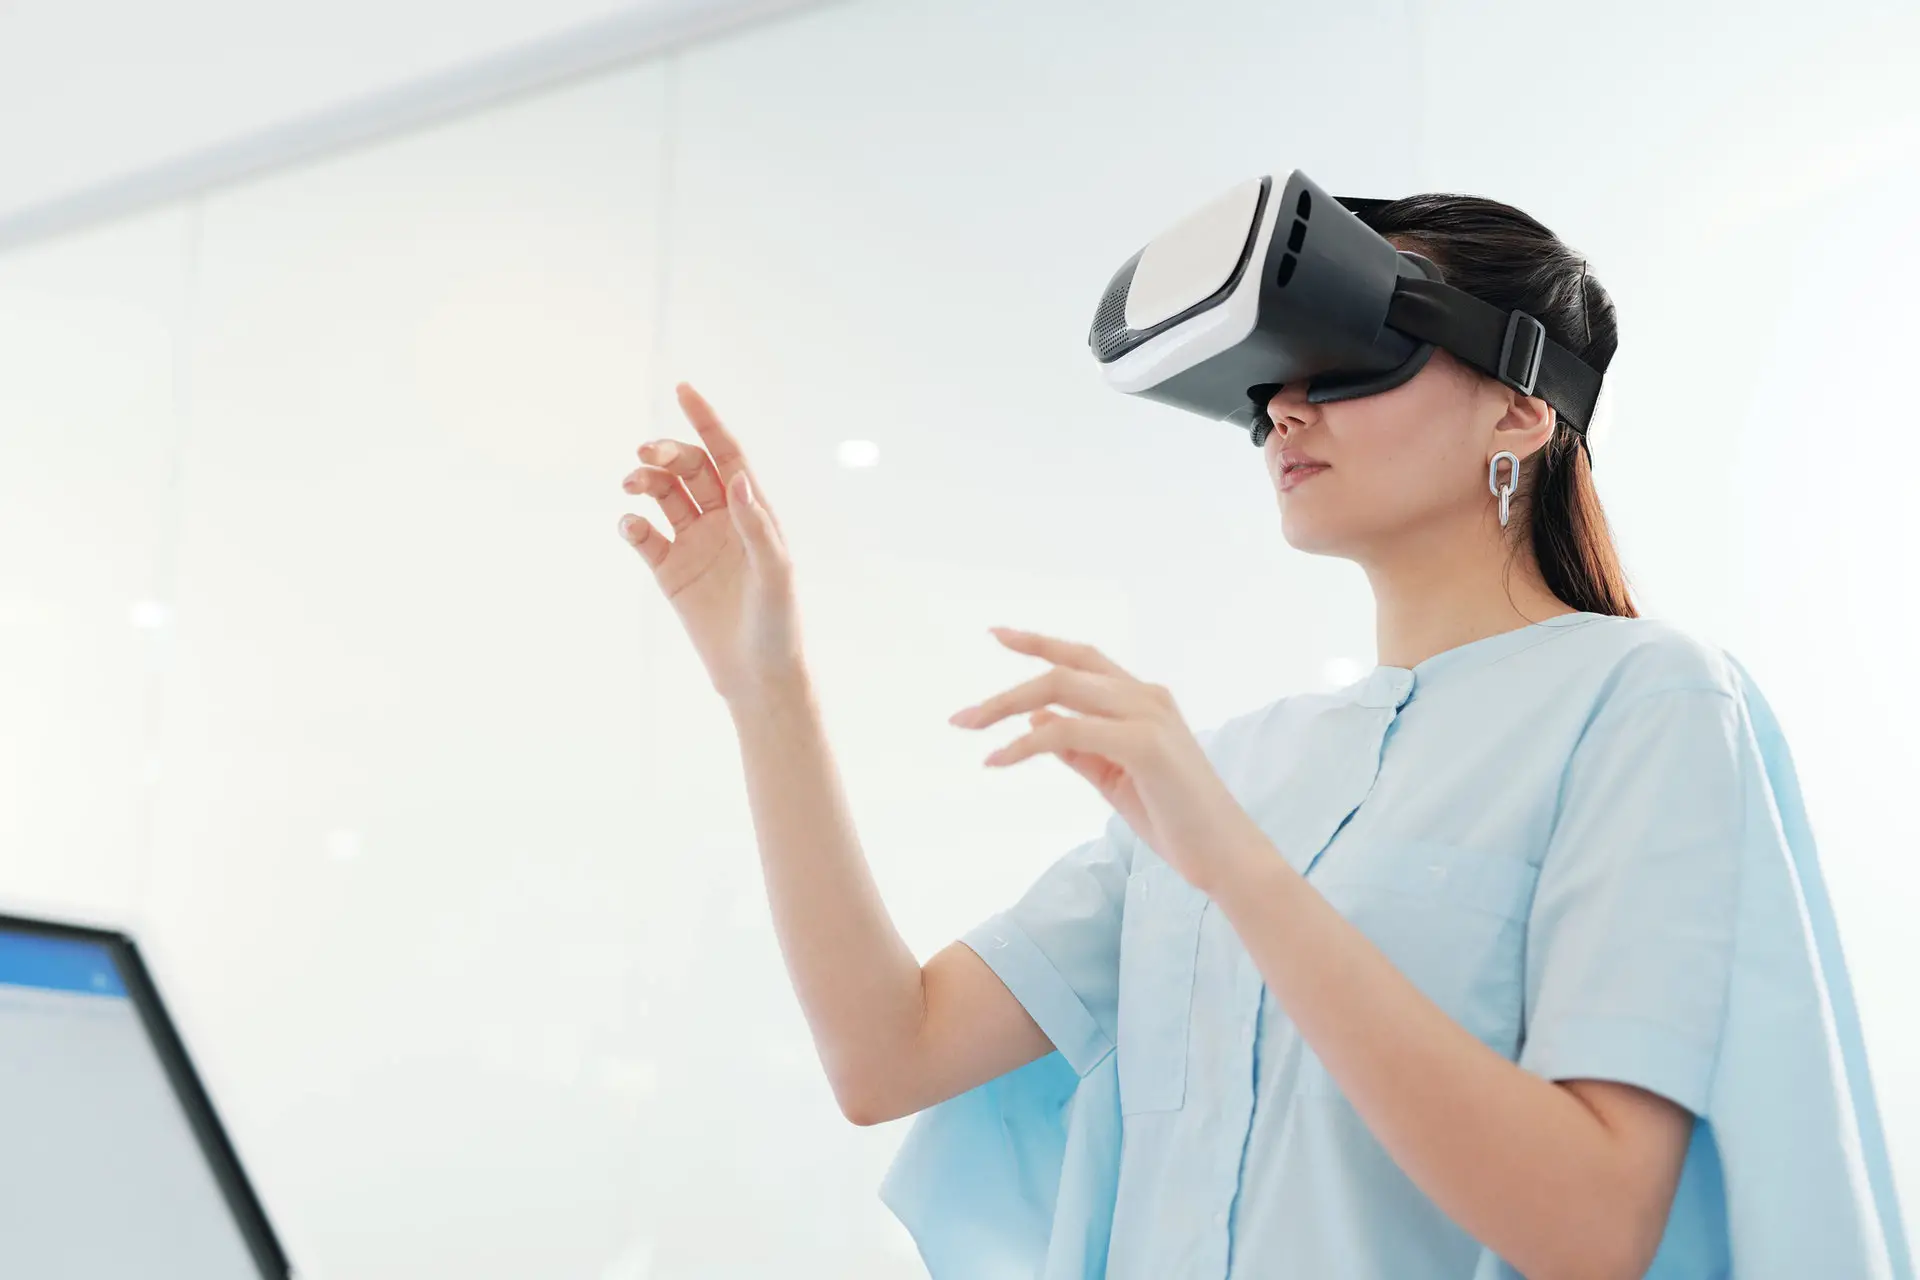 West Michigan Doctor Partners with Immertec to Develop VR Training Program for Physicians